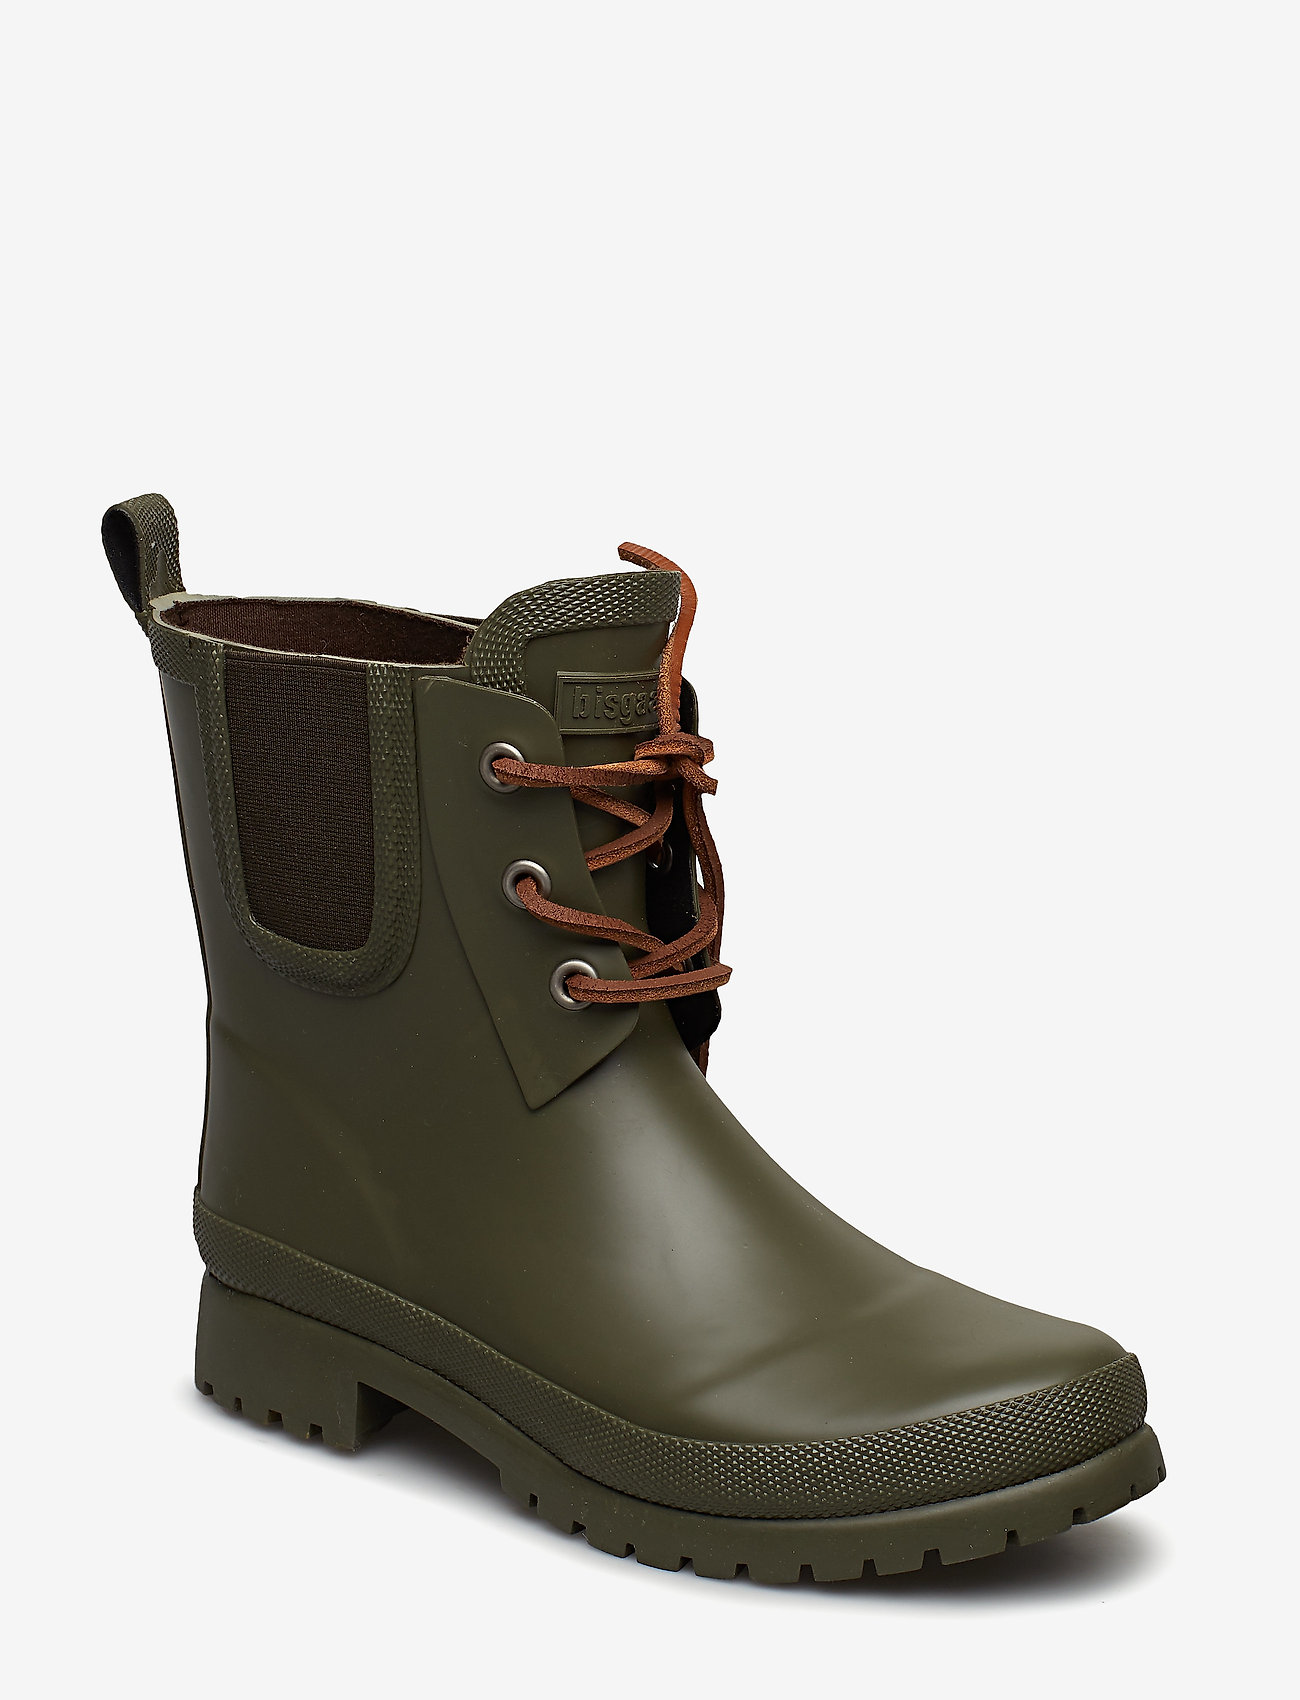 outer steel toe boots